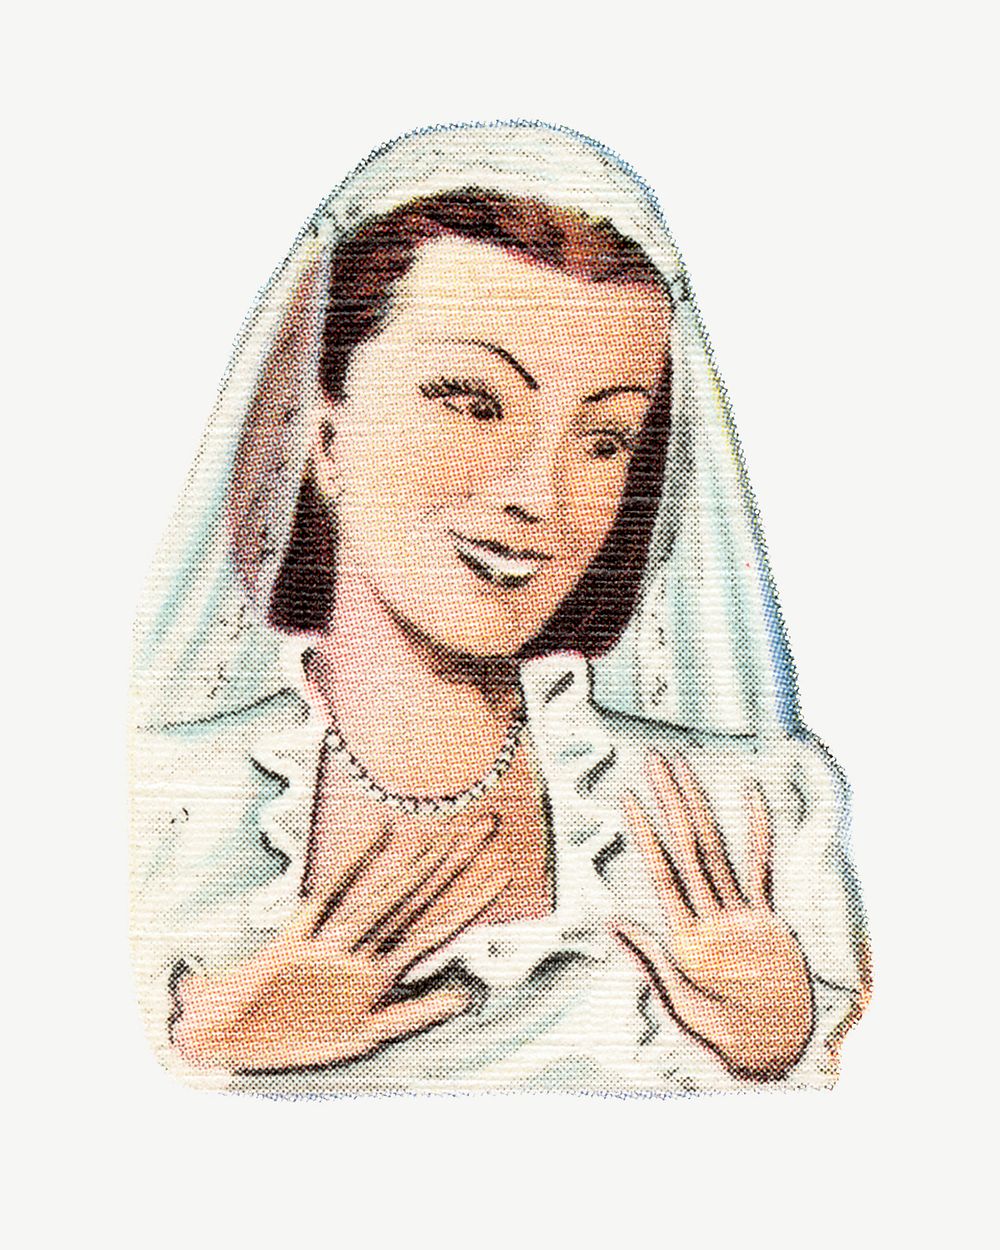 Smiling bride, vintage woman illustration psd. Remixed by rawpixel.